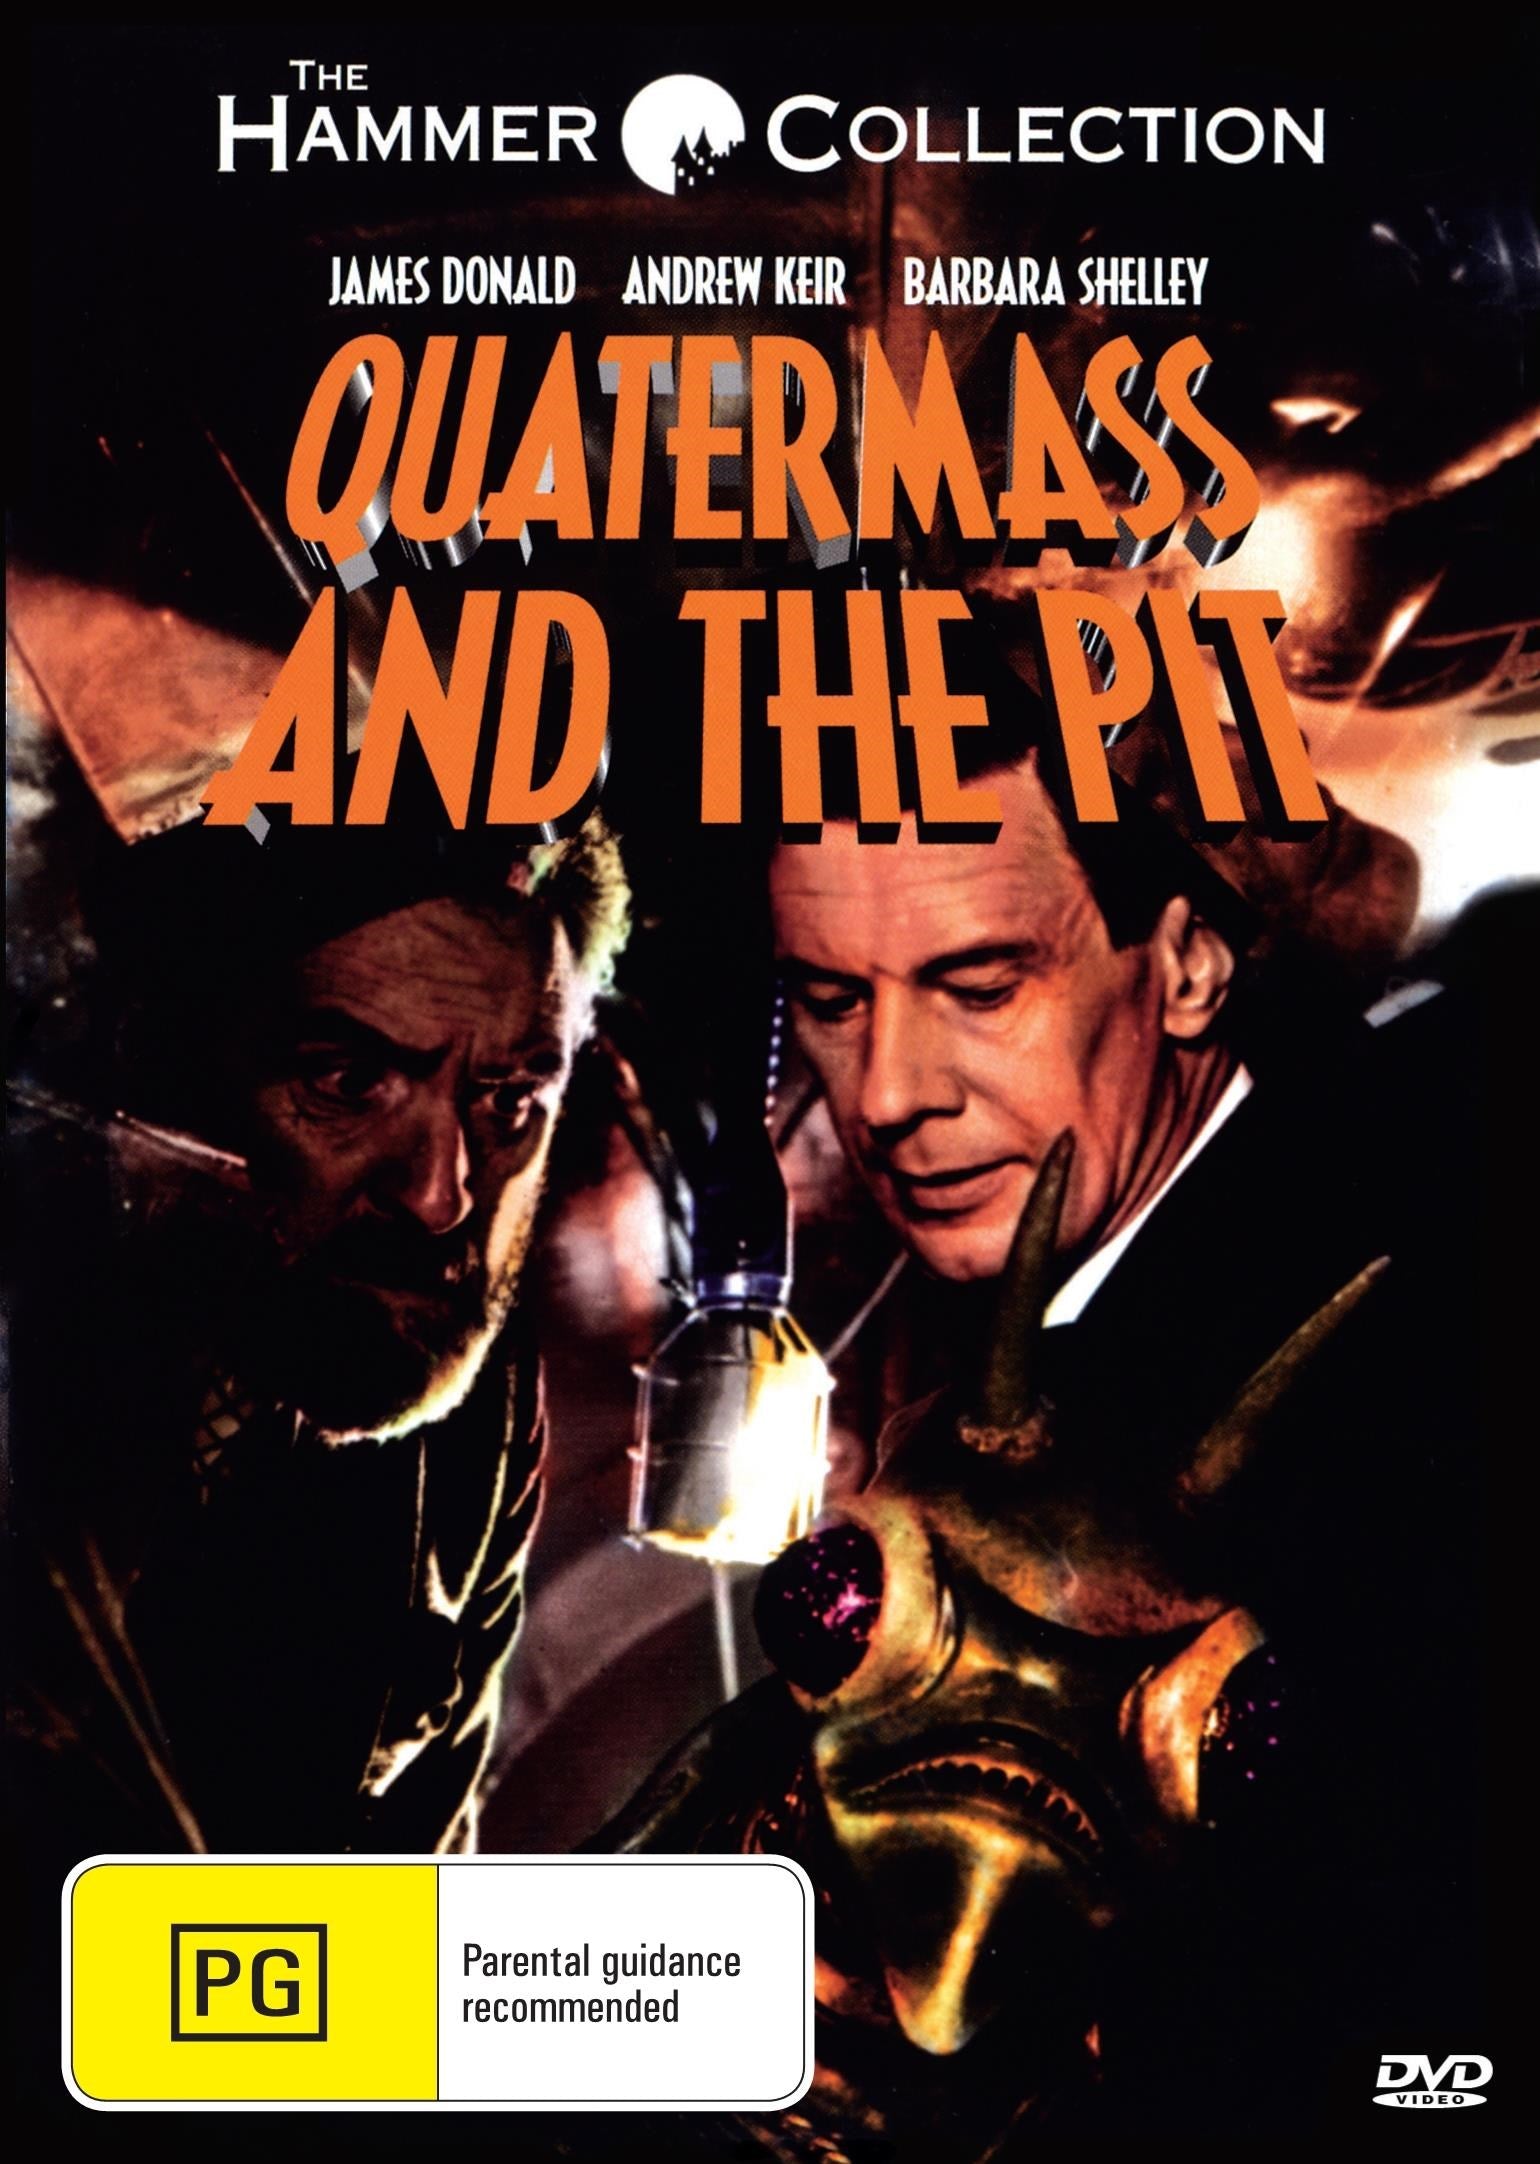 Quatermass And The Pit rareandcollectibledvds